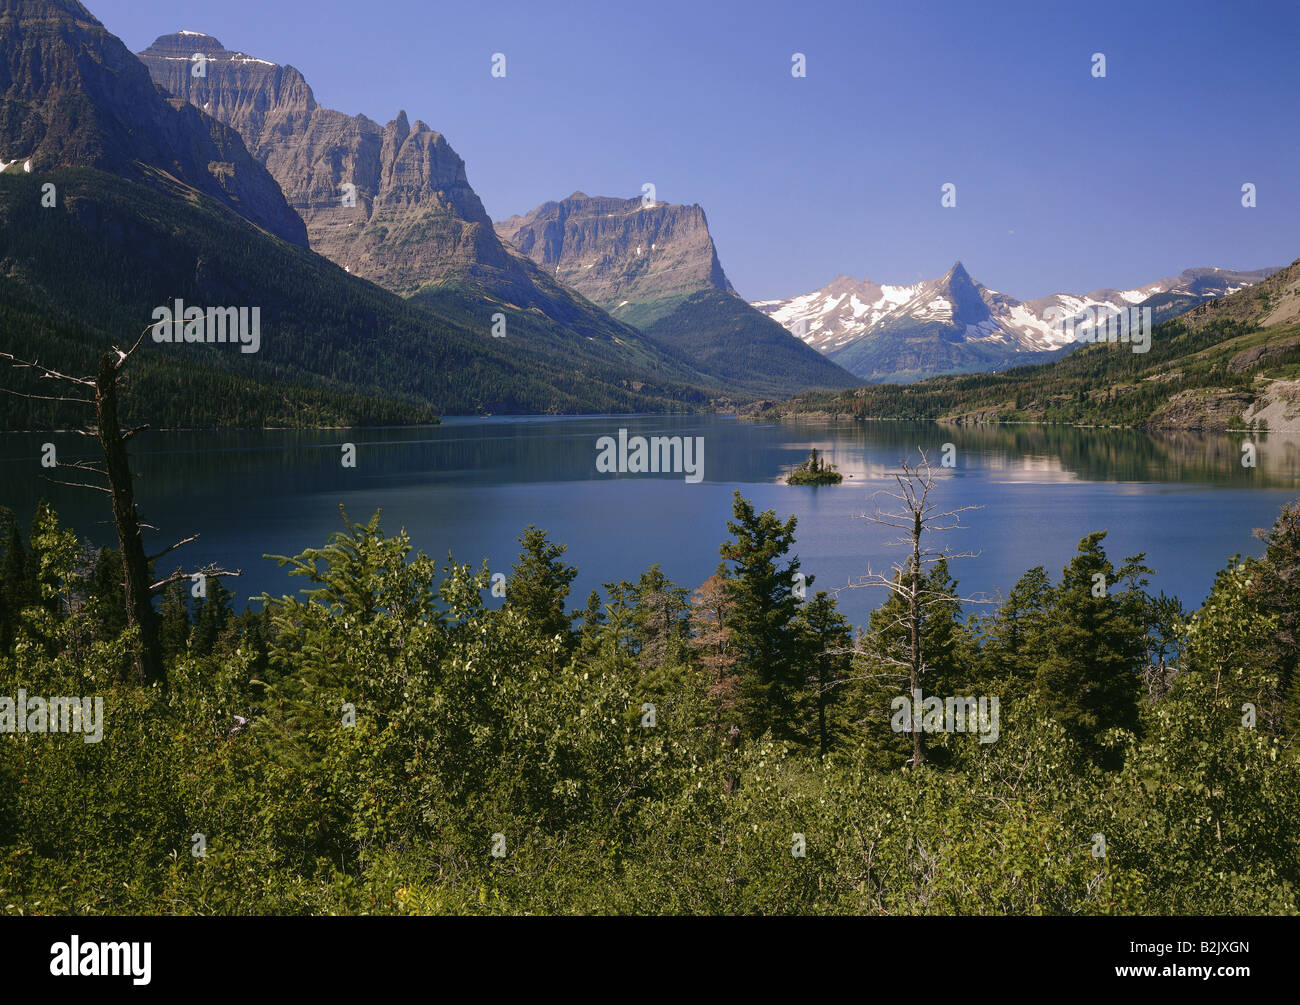 Geographie/Reisen, USA, Montana, Landschaften, Glacier National Park, St. Mary Lake mit Wild Goose Island, Chief Mountain, Citadelle Berg und Knallen Berg, Additional-Rights - Clearance-Info - Not-Available Stockfoto